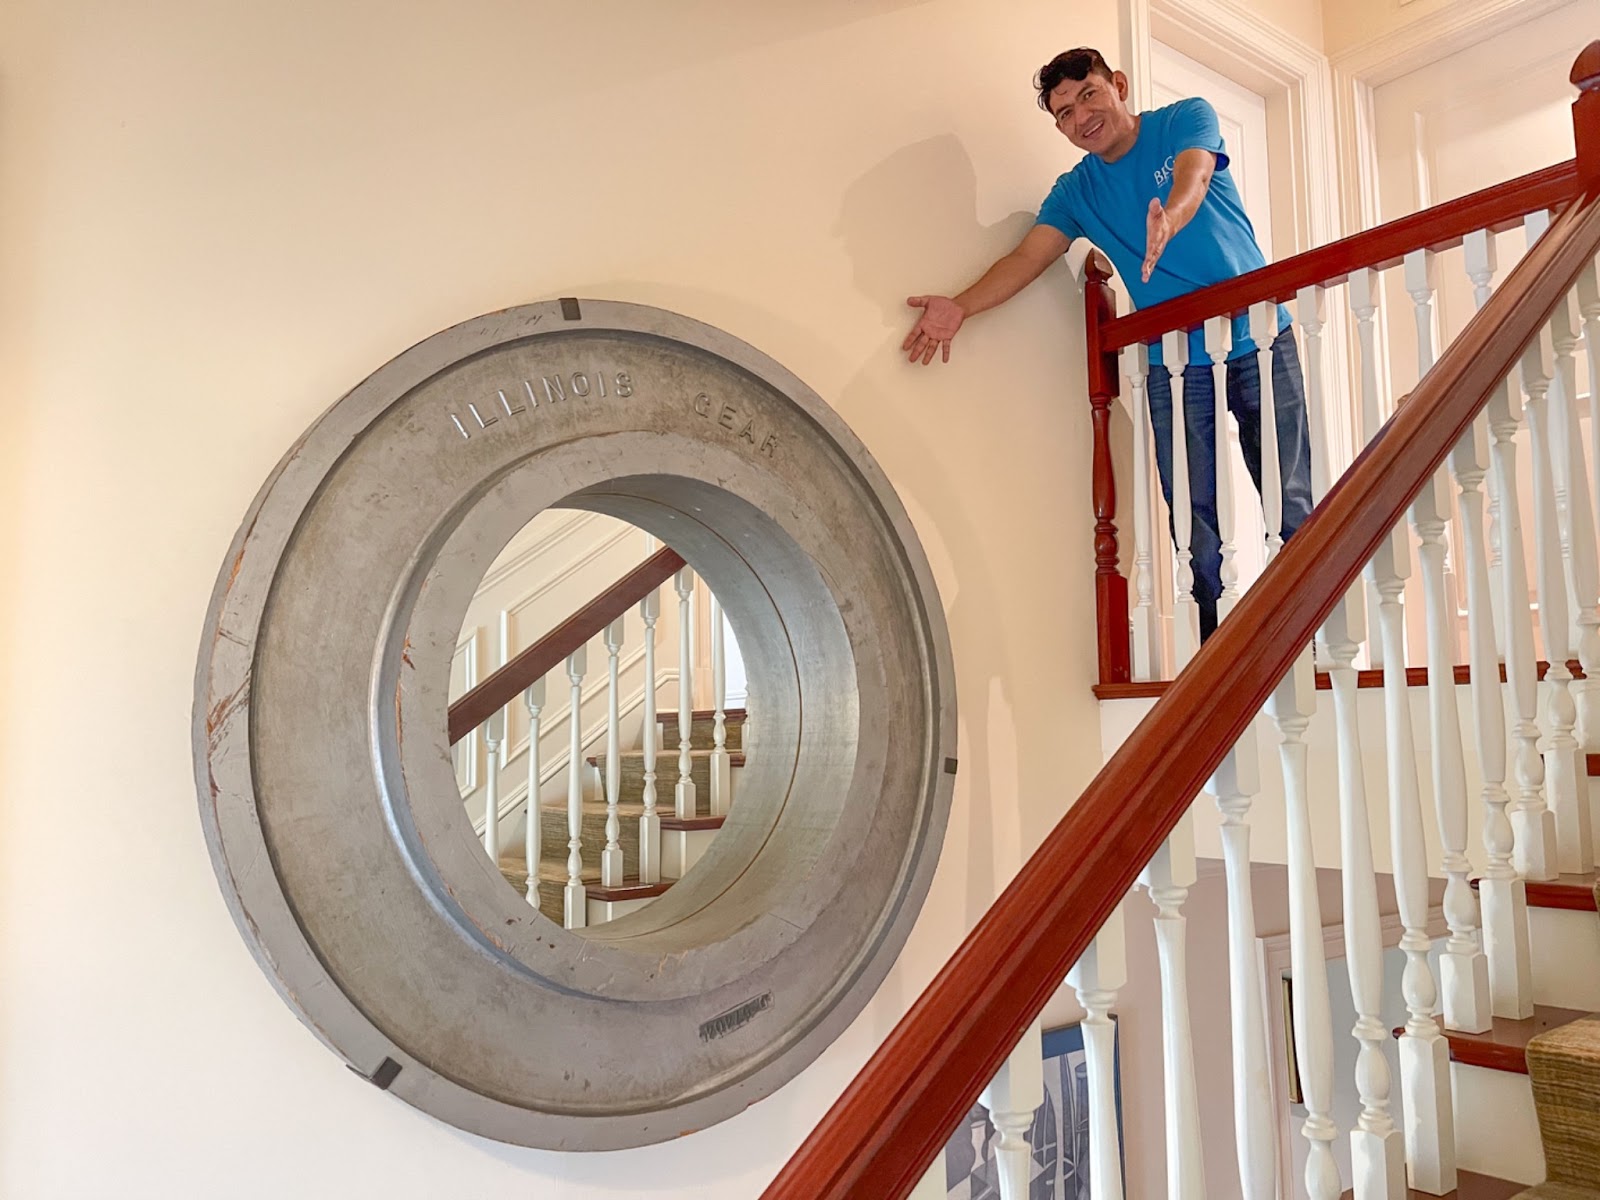 Oversized industrial mirror made from a train gear mold that reads “Illinois Gear”